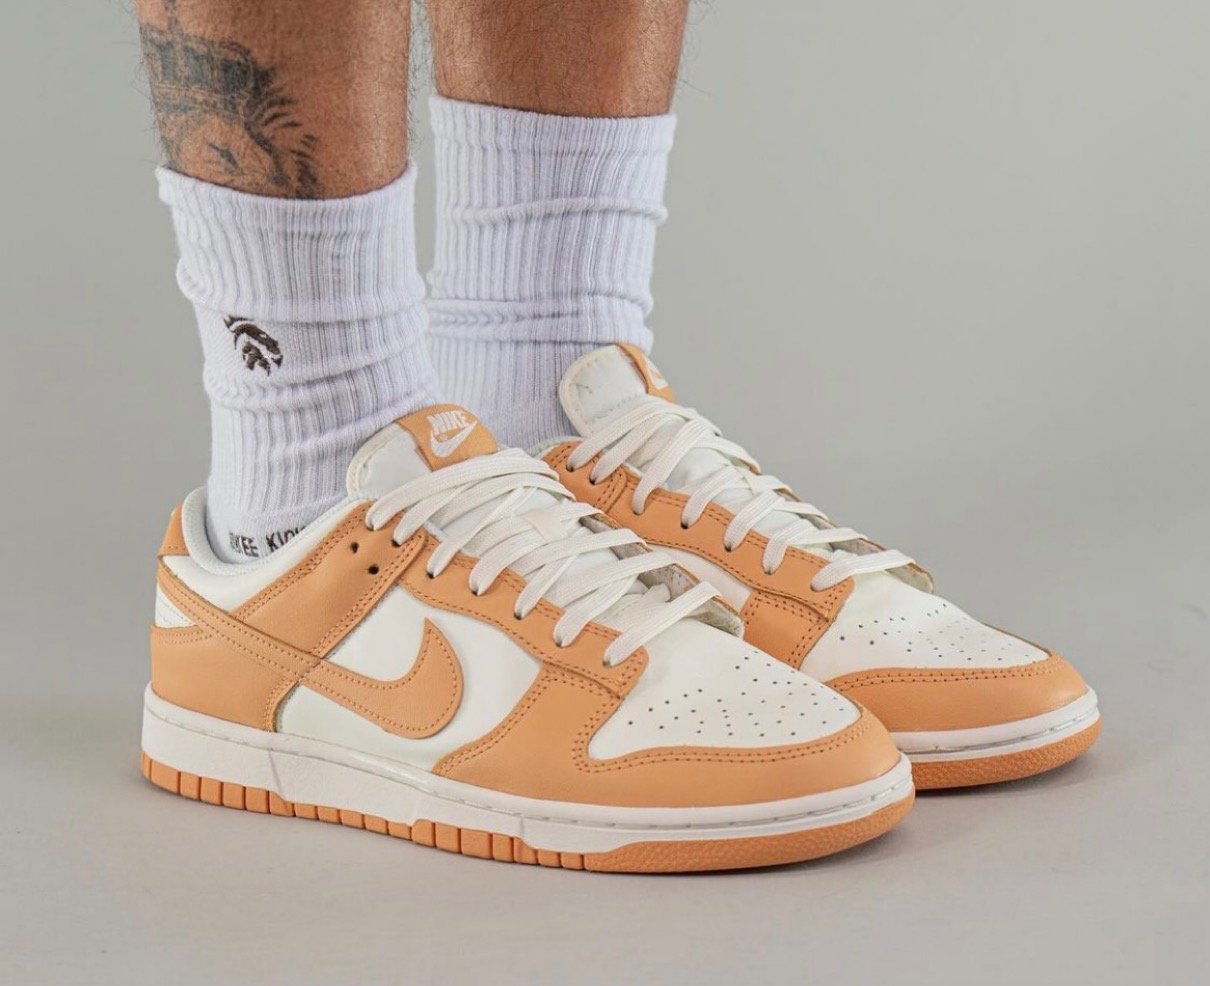 Nike Wmns Dunk Low “Harvest Moon”が国内2月4日に発売予定 | UP TO DATE